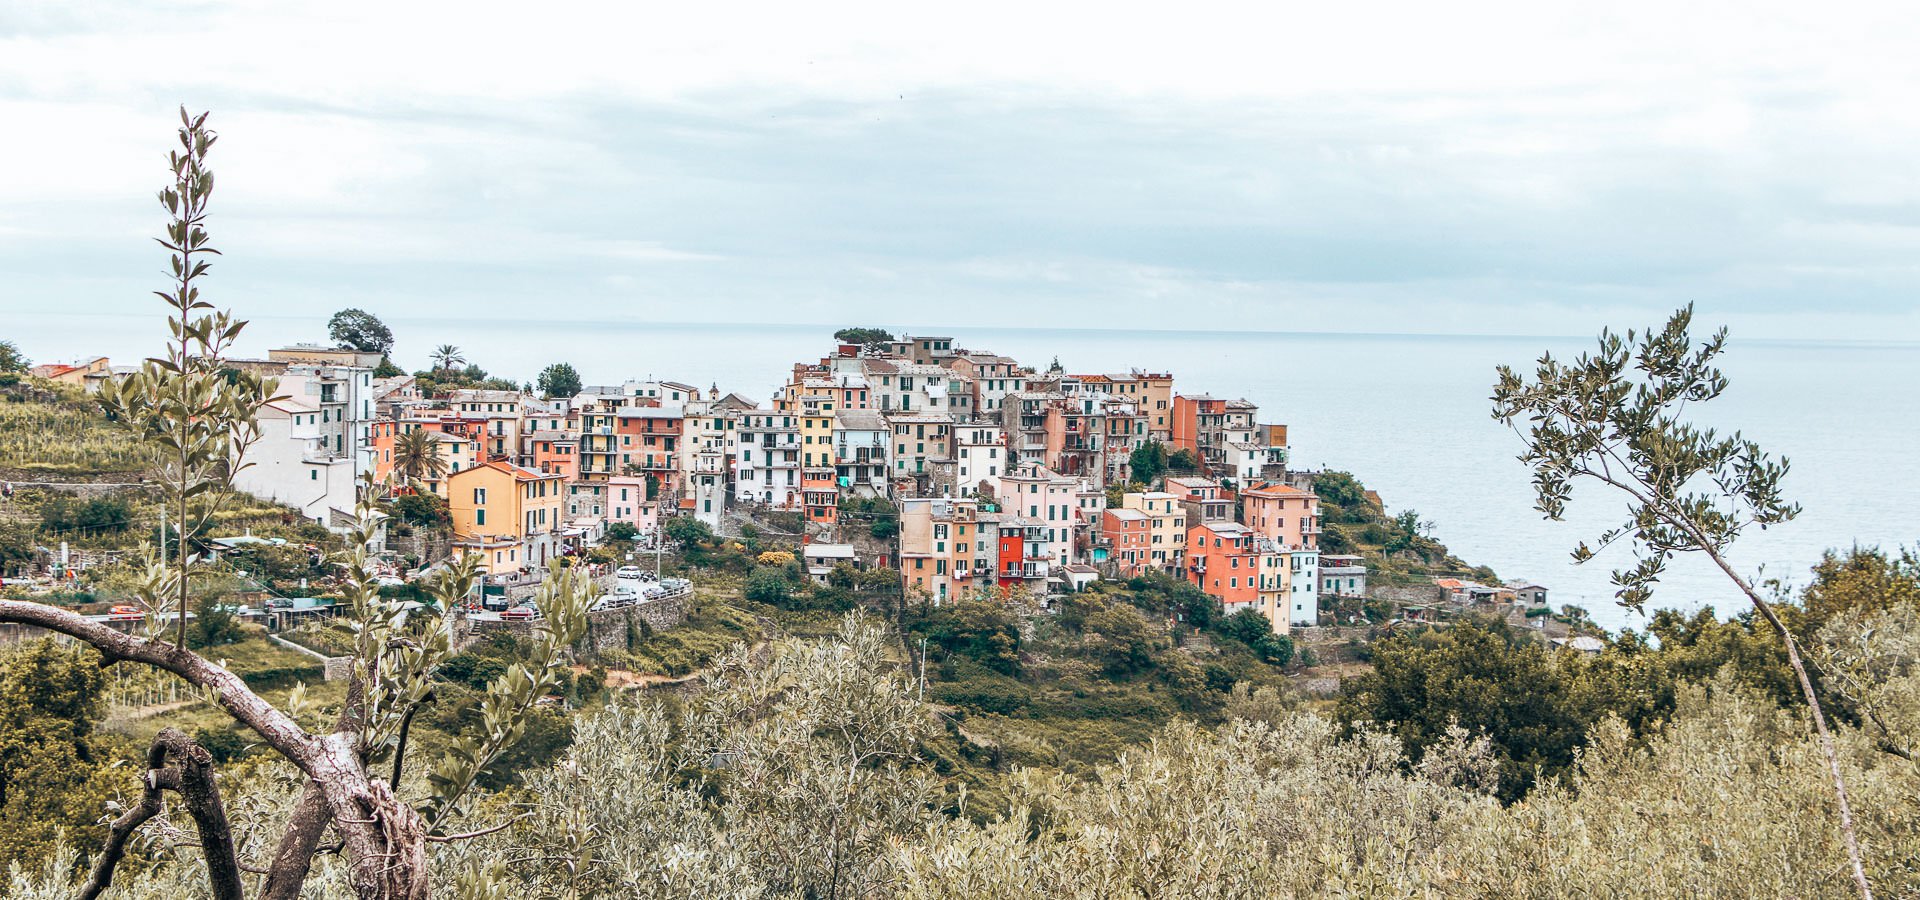 How To Spend 3 Days In Cinque Terre | how to spend 3 days in cinque terre 4